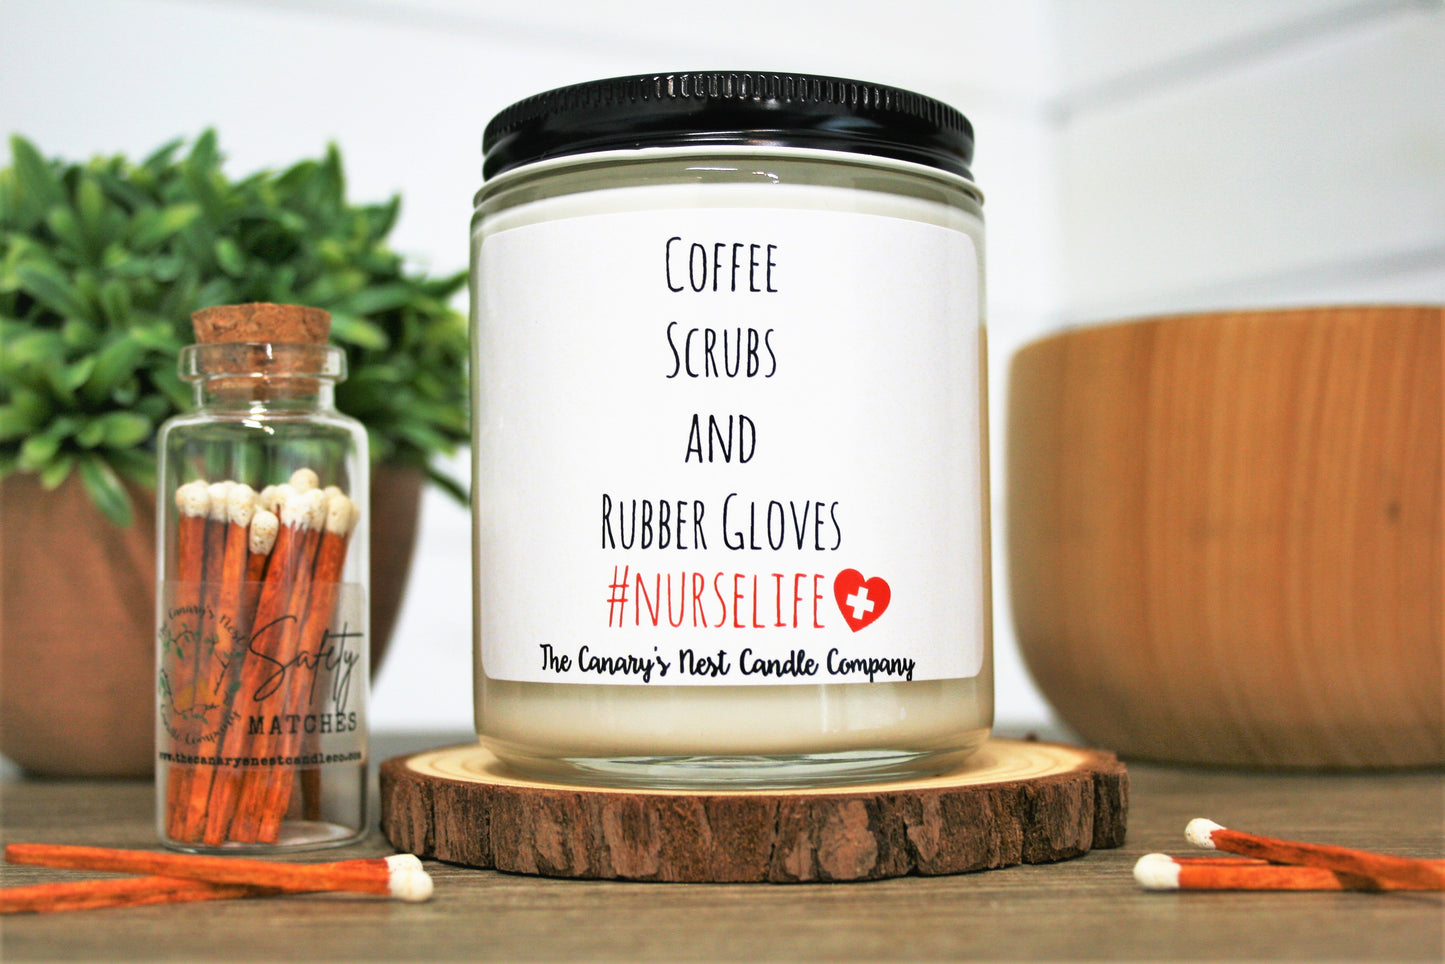 Coffee Scrubs and Rubber Gloves #NURSELIFE Soy Candle